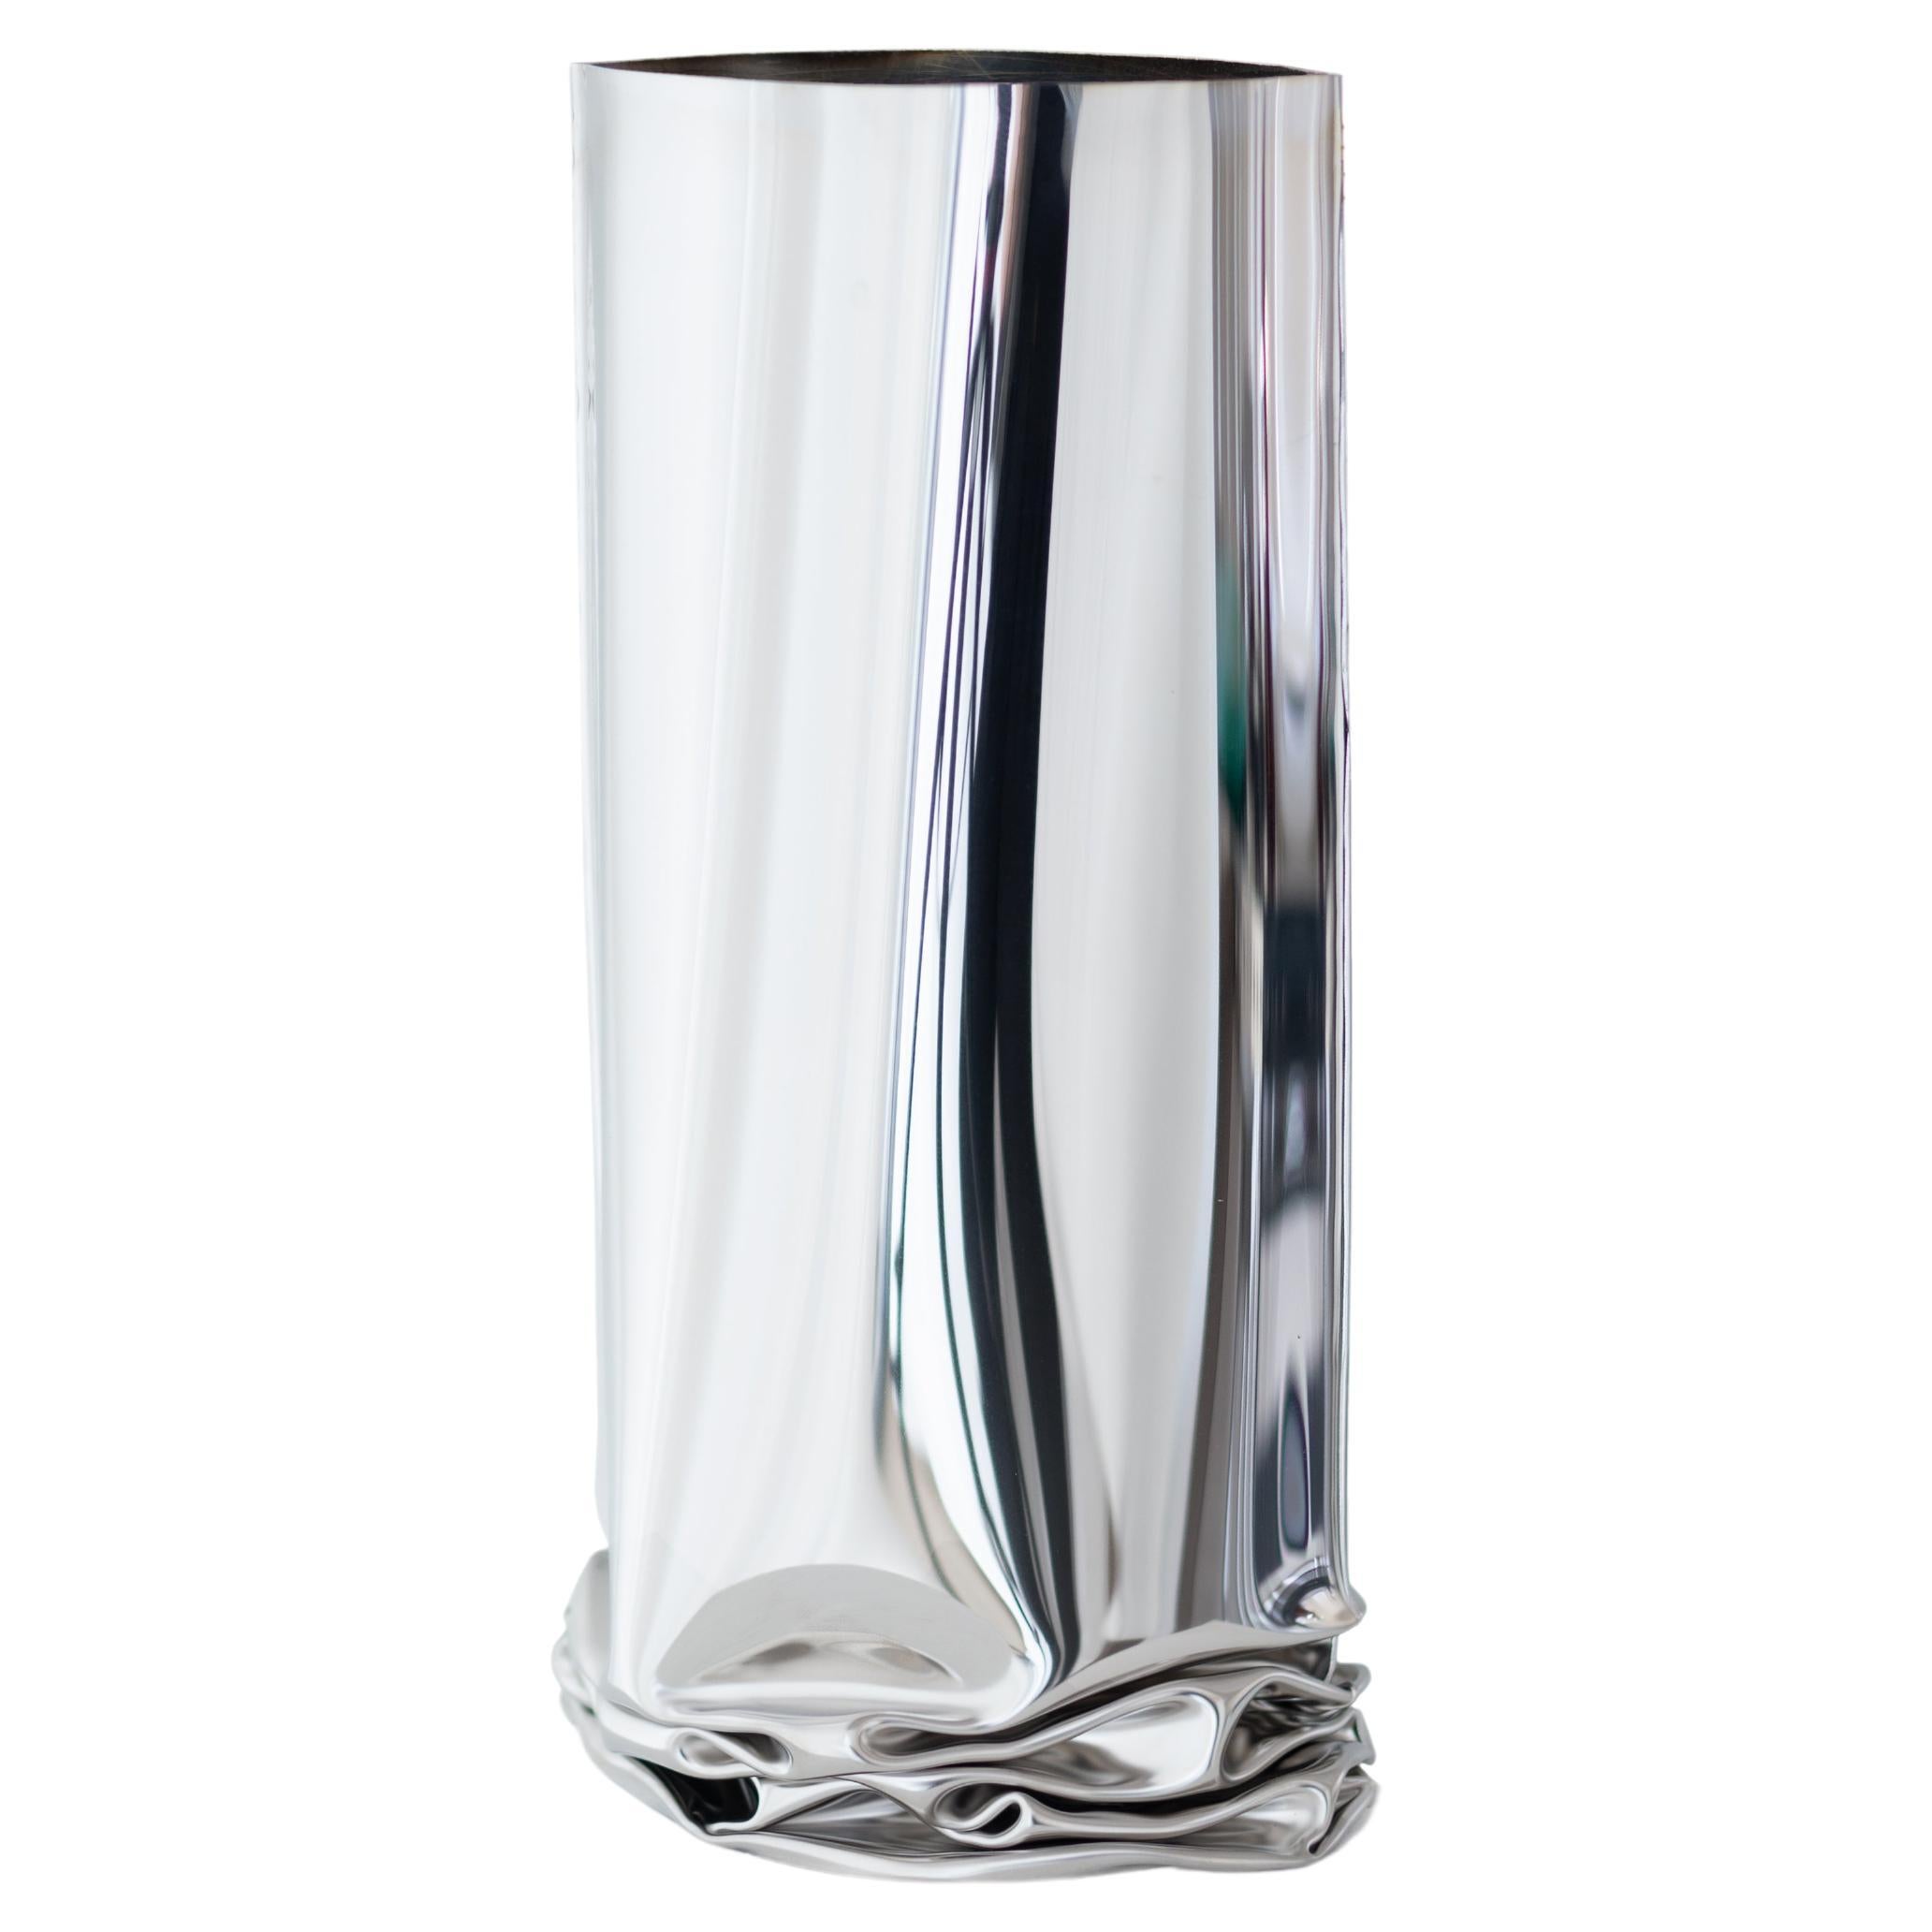 Contemporary Vase, 'Crash Vase' by Zieta, Large, Stainless Steel For Sale